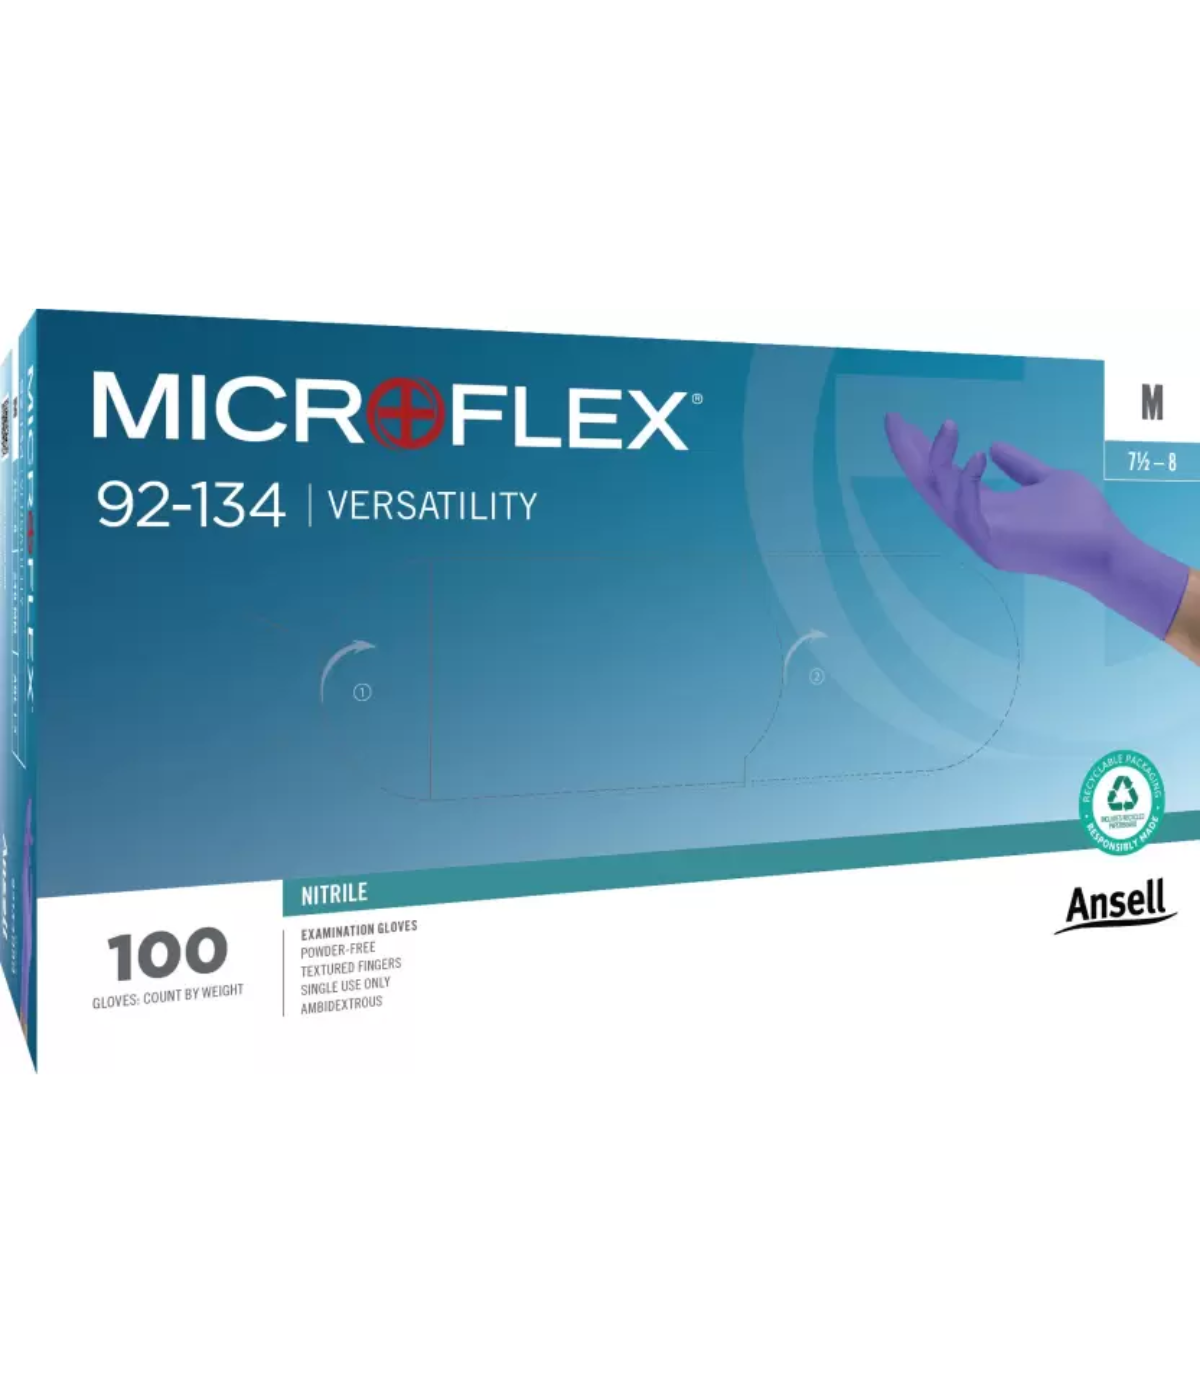 https://dentalgenie.in/wp-content/uploads/2022/06/Ansell-Micro-Flex.png